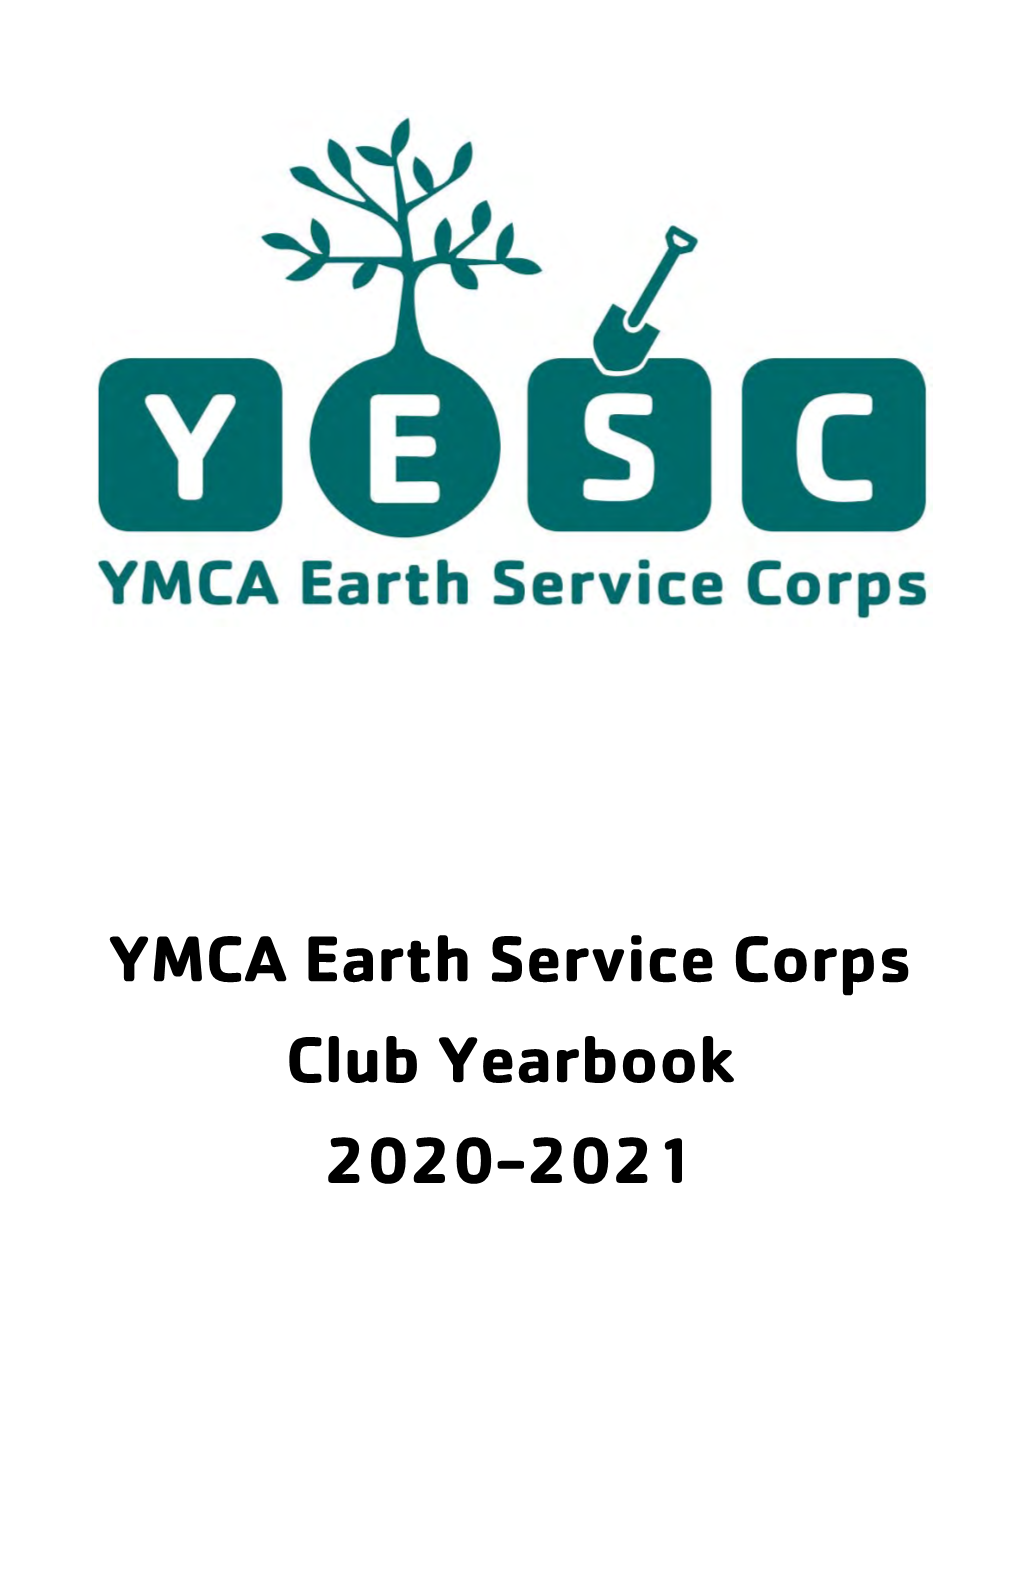 YMCA Earth Service Corps Club Yearbook 2020-2021